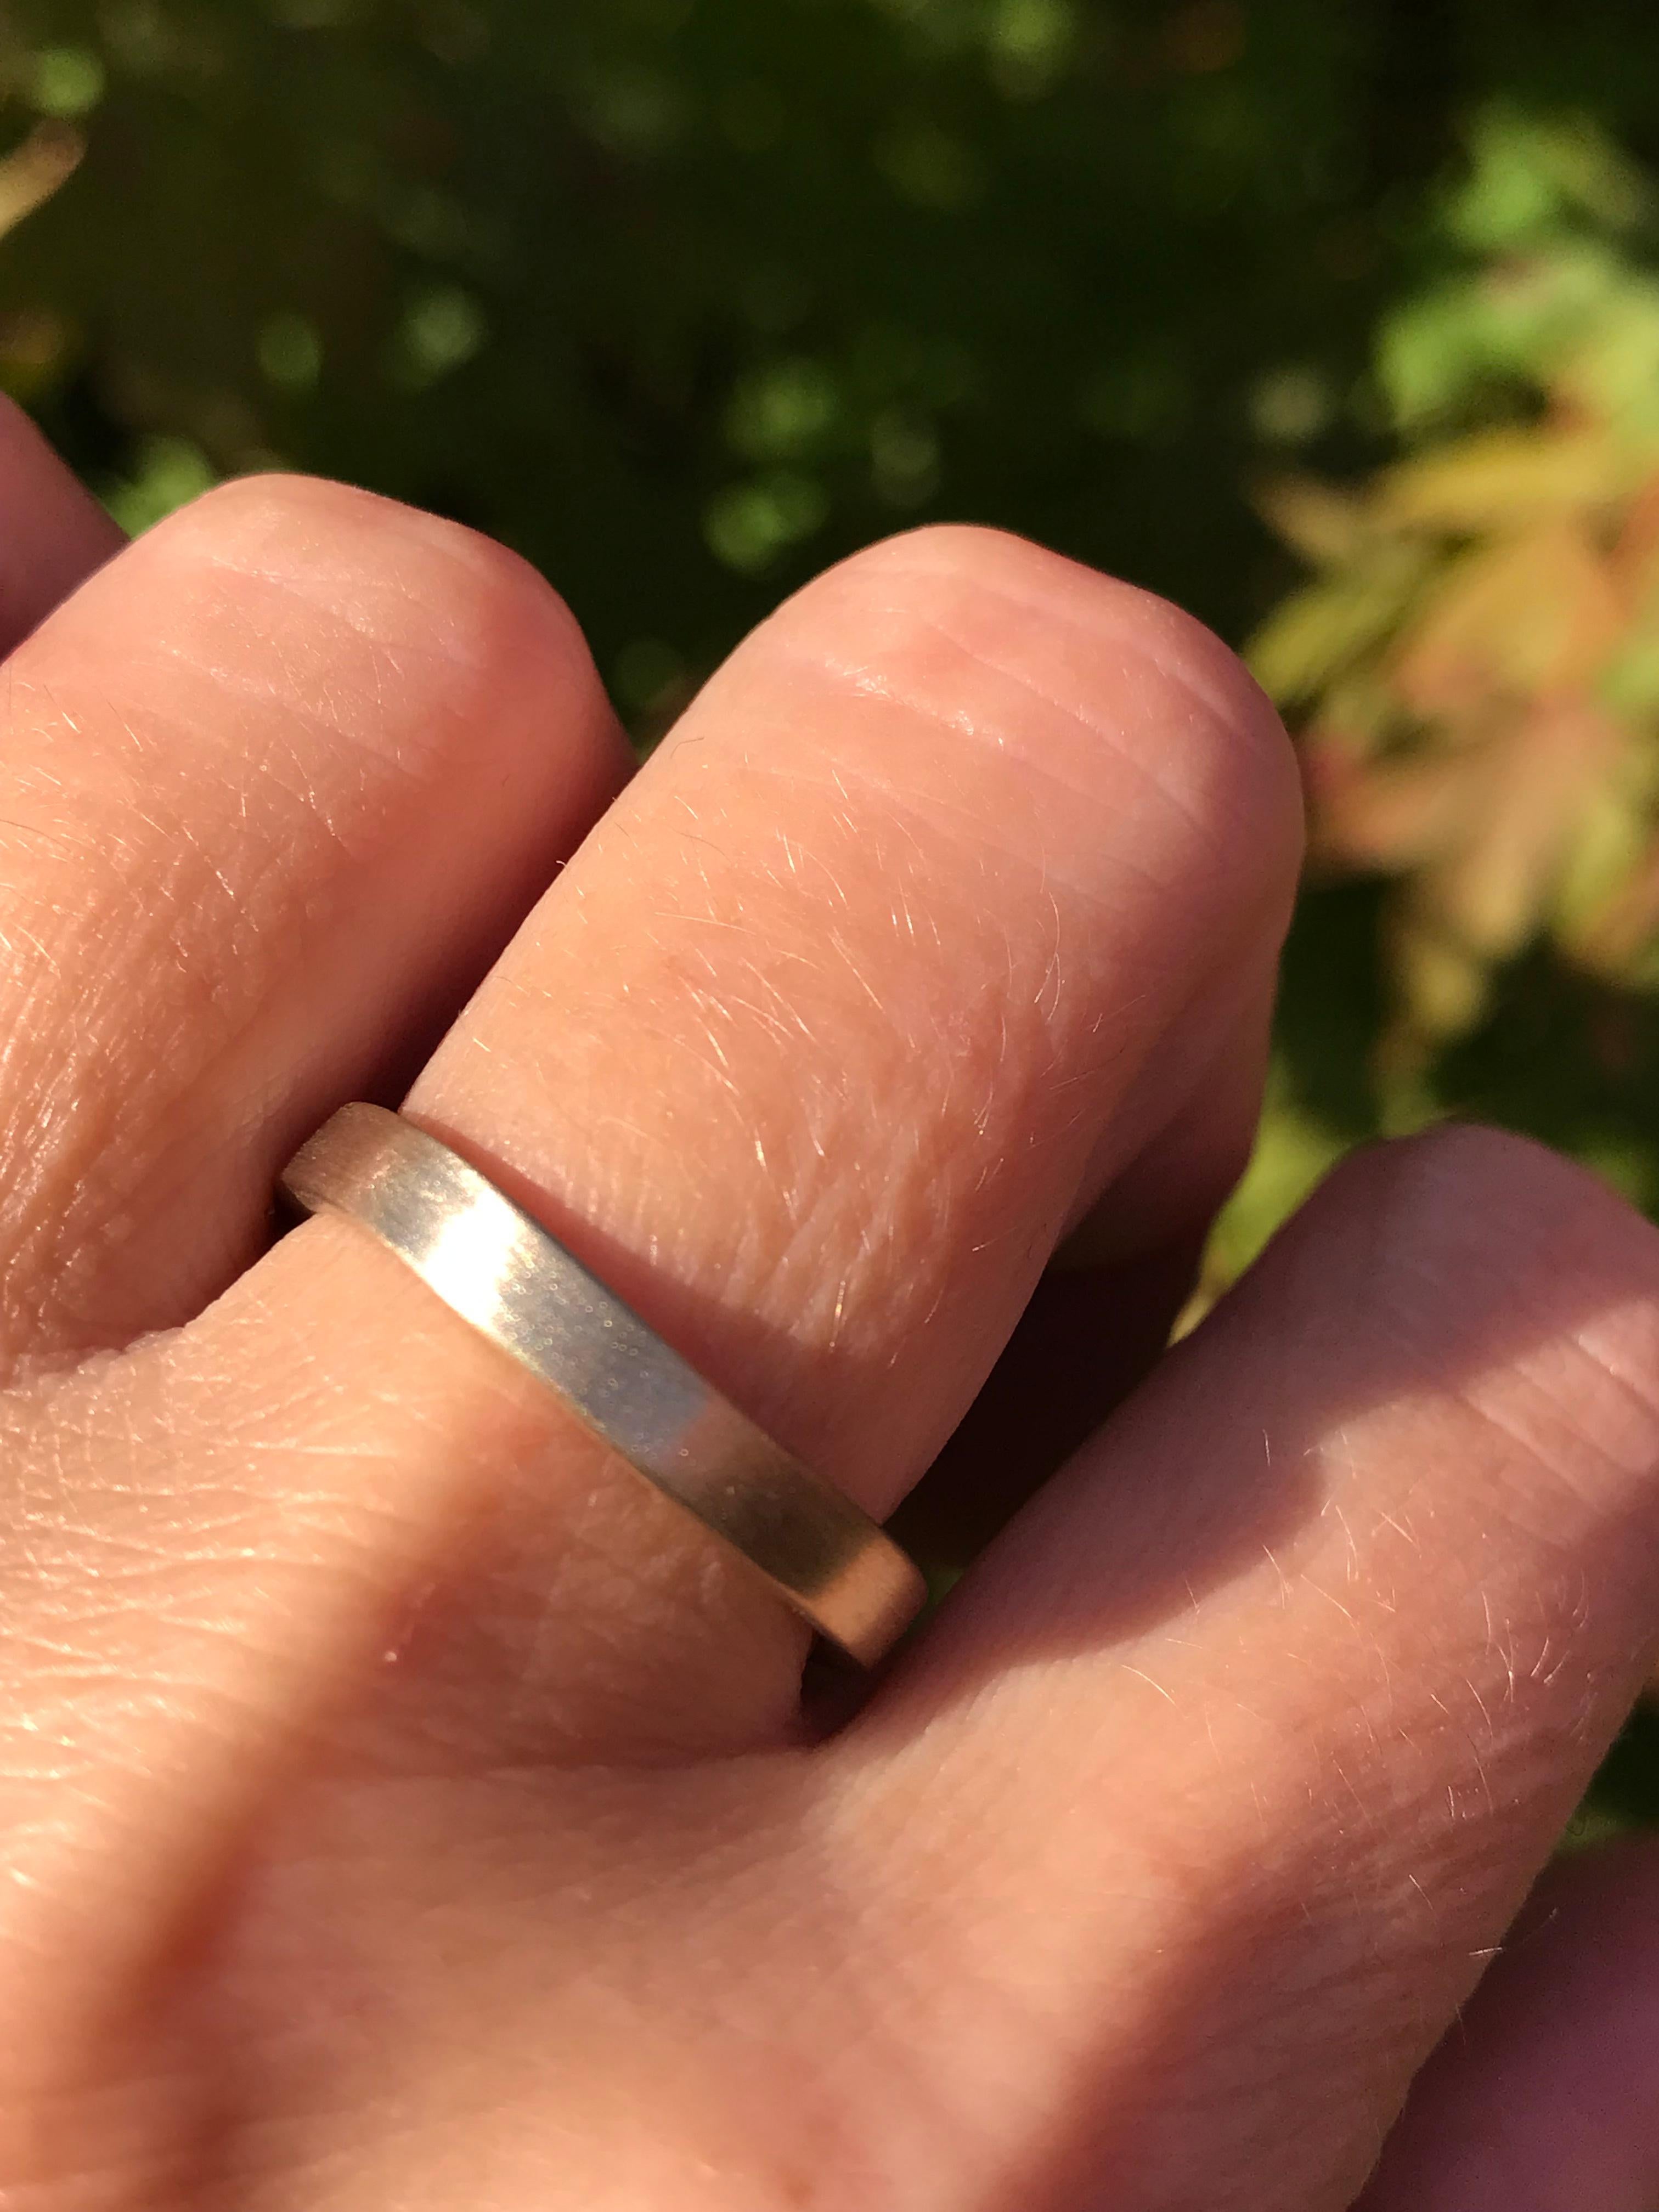 Dalben design 18 kt white gold smooth squared satin finishing band ring 
The ring shape is slightly irregular 
band height 3,2 mm
This ring requires 4 week from order to be custom-made size.
The ring is completely hand made in our atelier in Italy